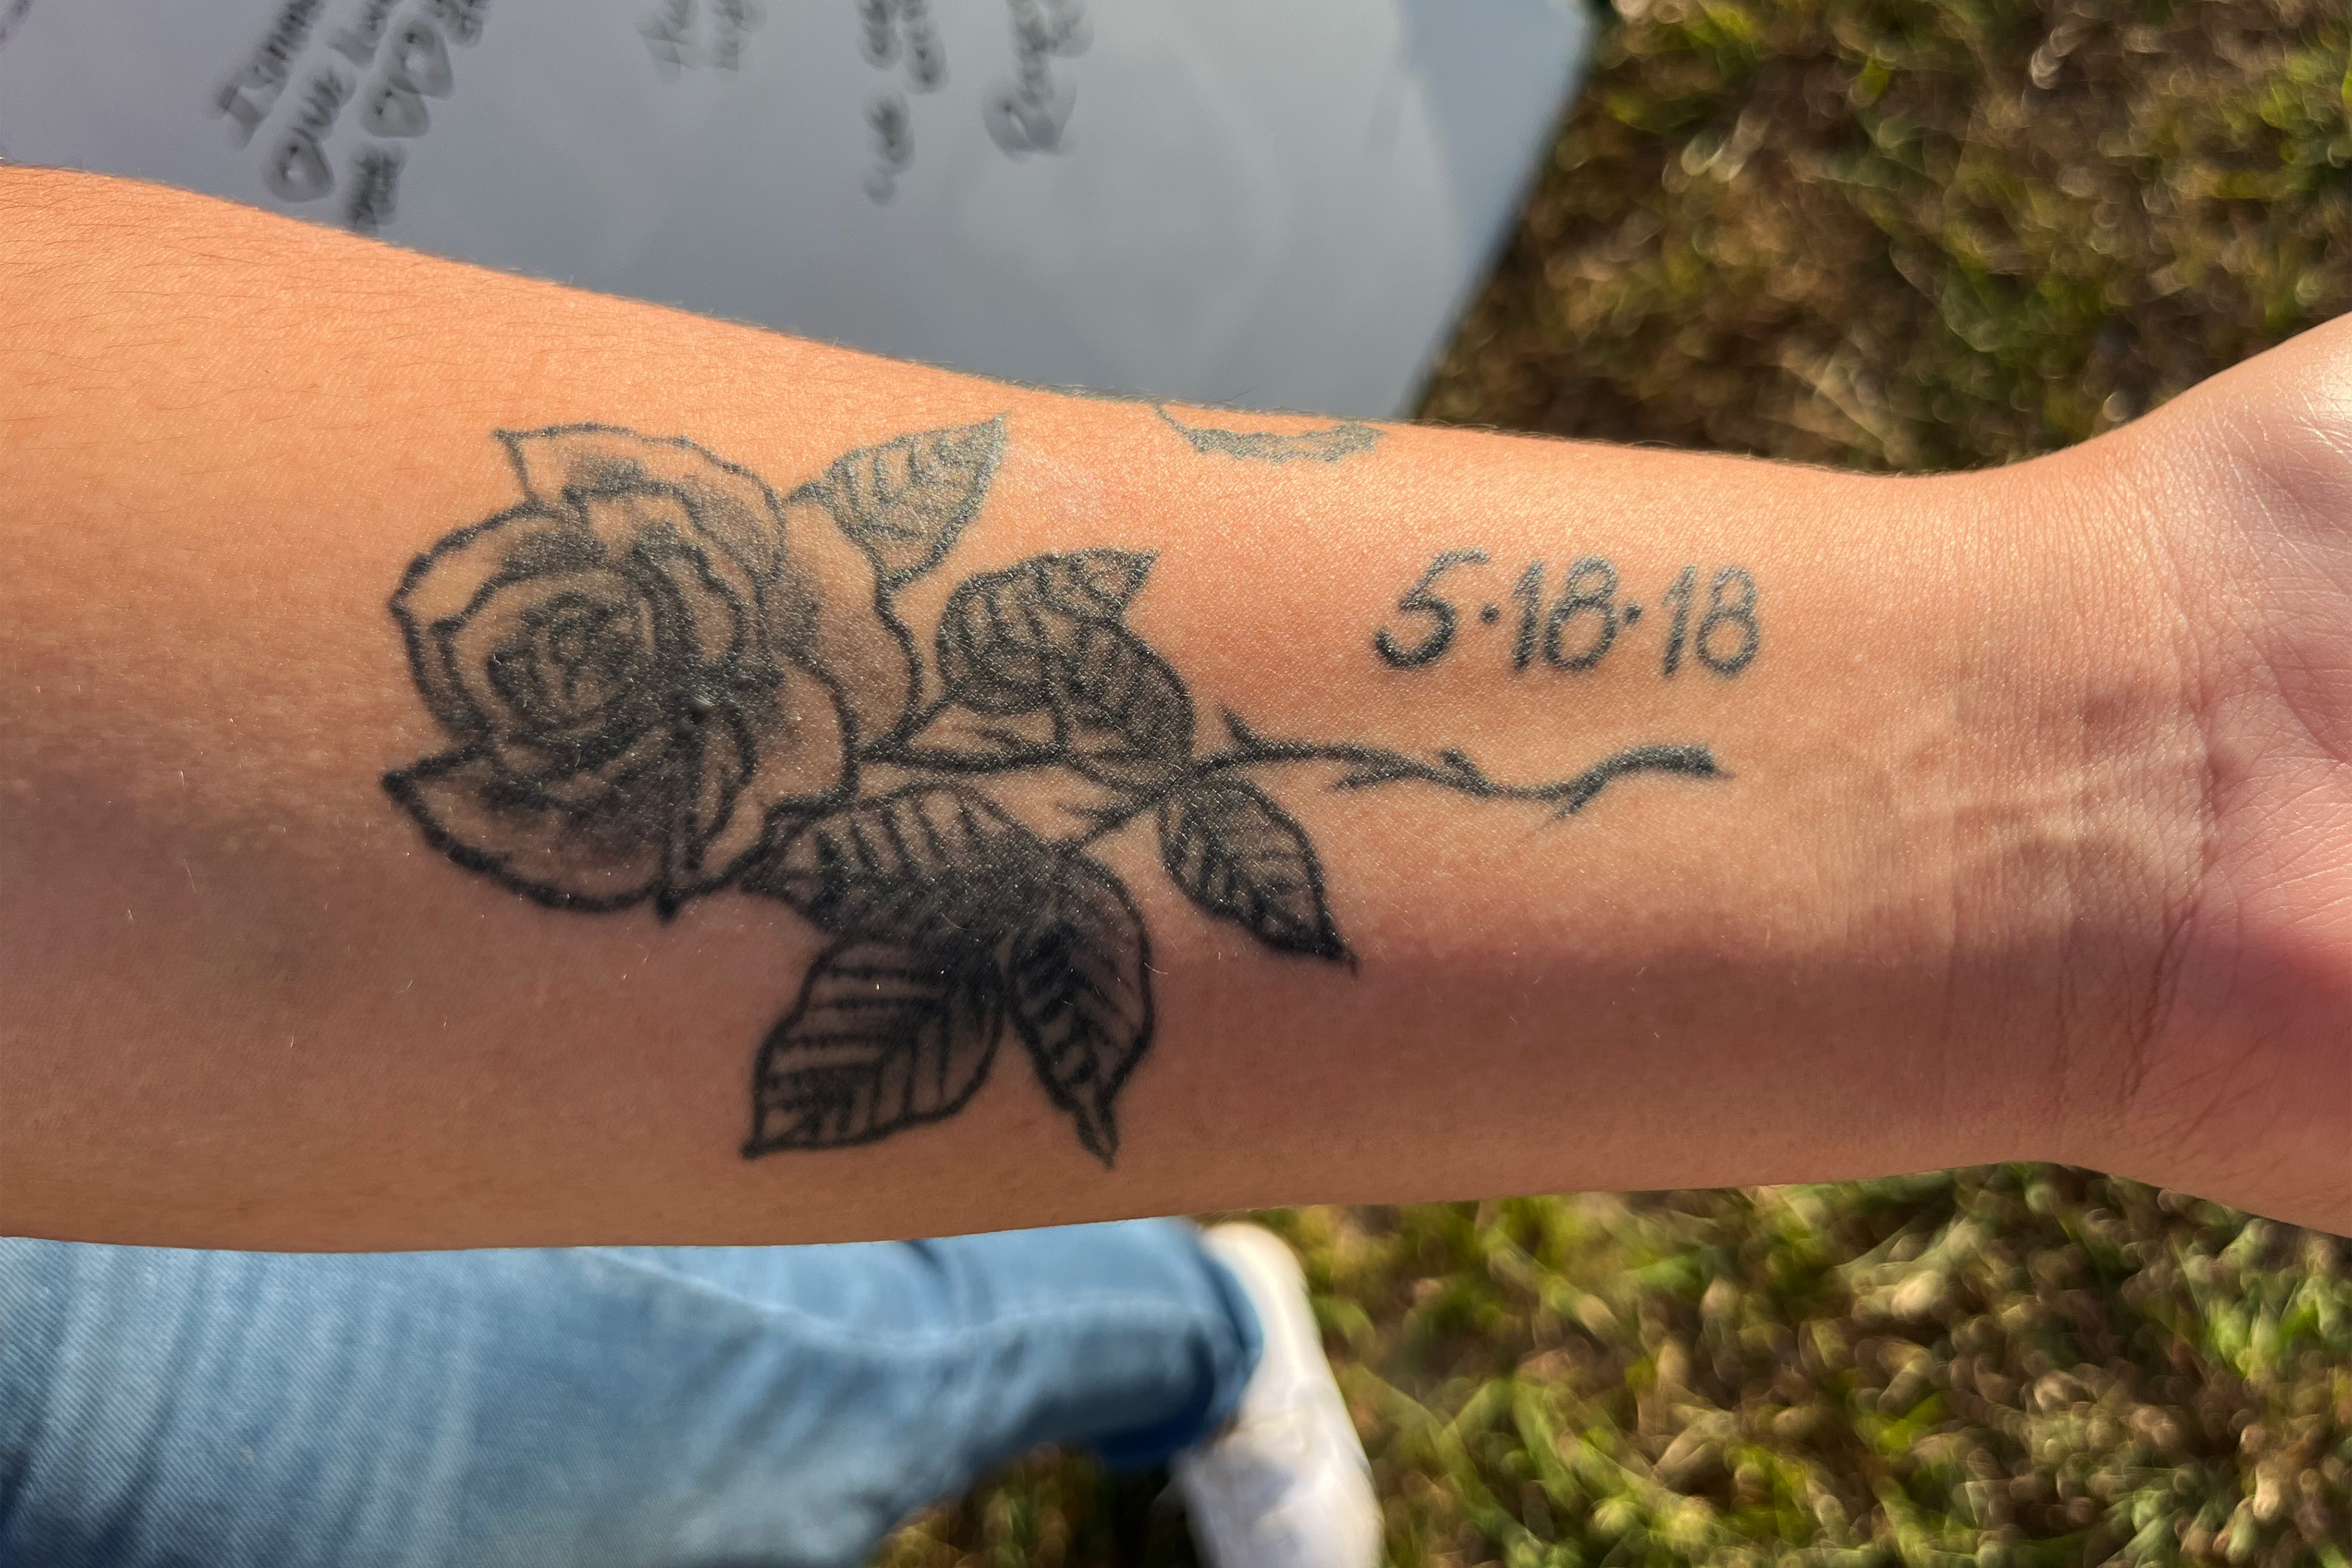 A photo of Reagan Gaona's wrist shows a black and gray rose tattoo with the date next to it: May 18, 2018.